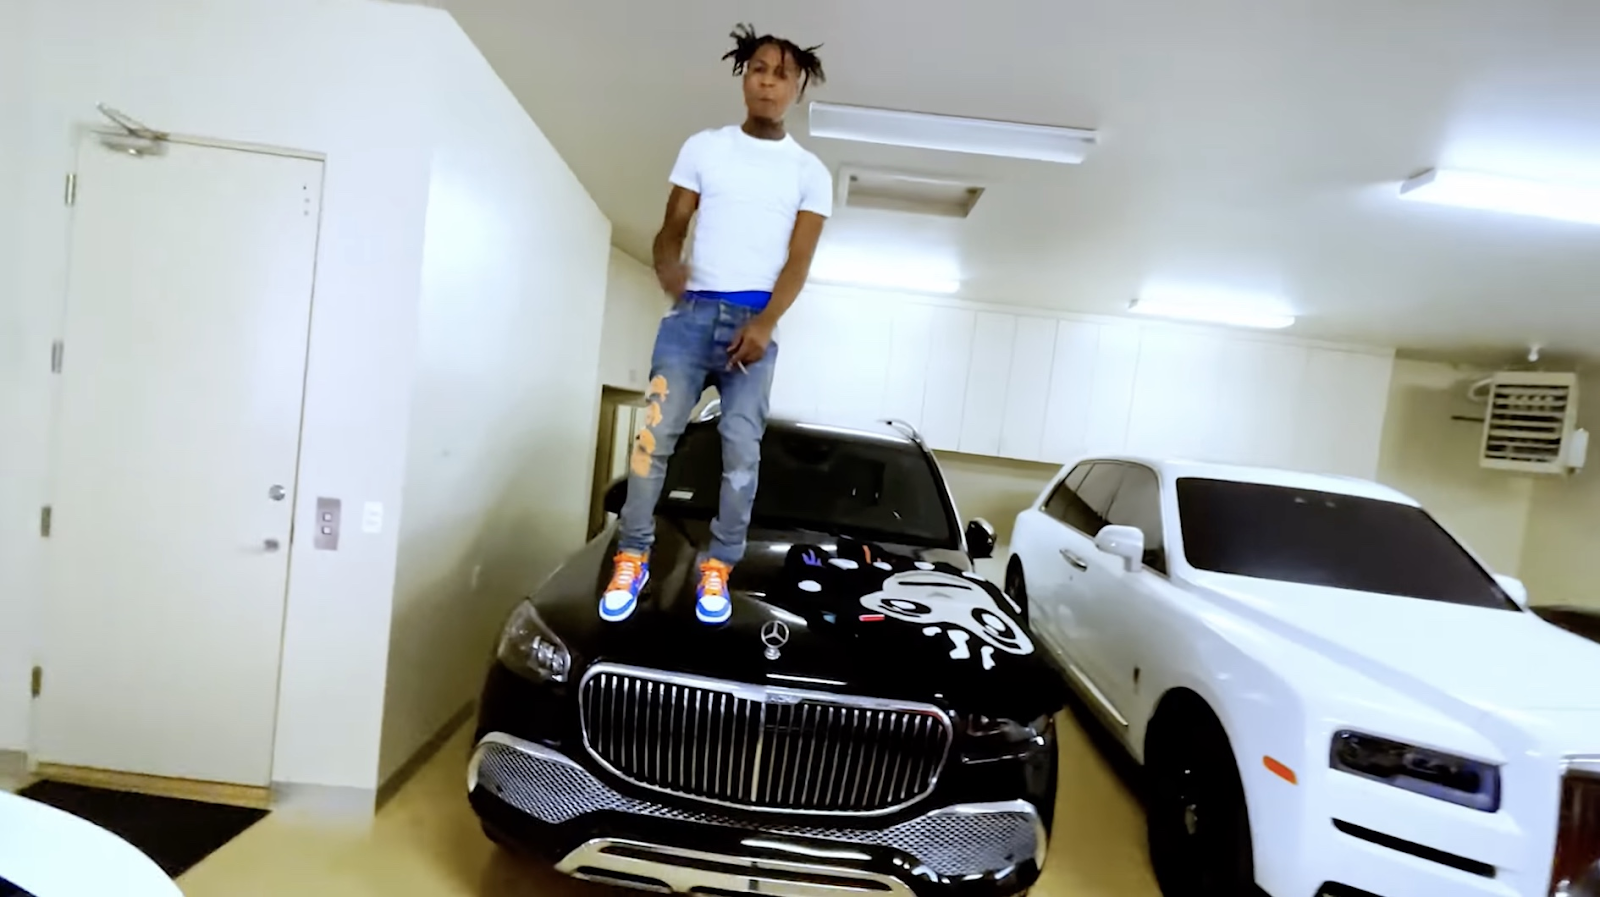 YoungBoy Never Broke Again&rsquo;s Expenditure